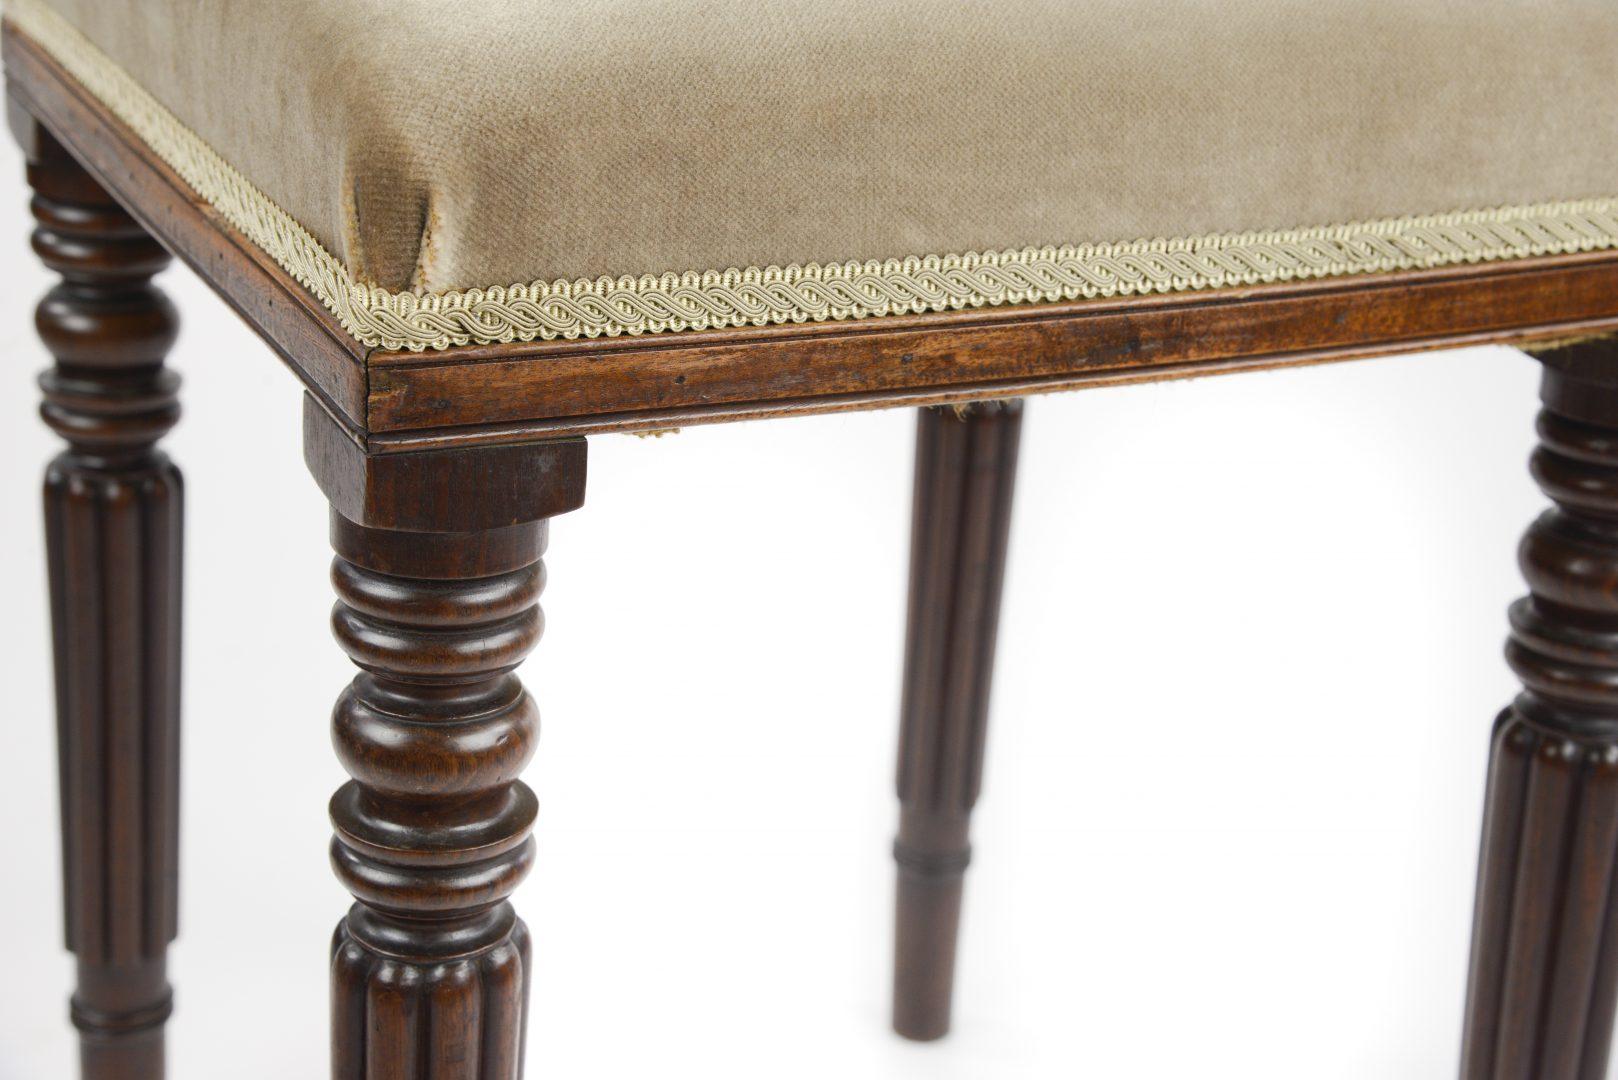 Accredited to Gillows a mahogany stool, William IV circa 1830 on reeded splayed supports with a square top.
Gillows was owned by the family until 1814 when it was taken over by Redmayne, Whiteside, and Ferguson; they continued to use the Gillow